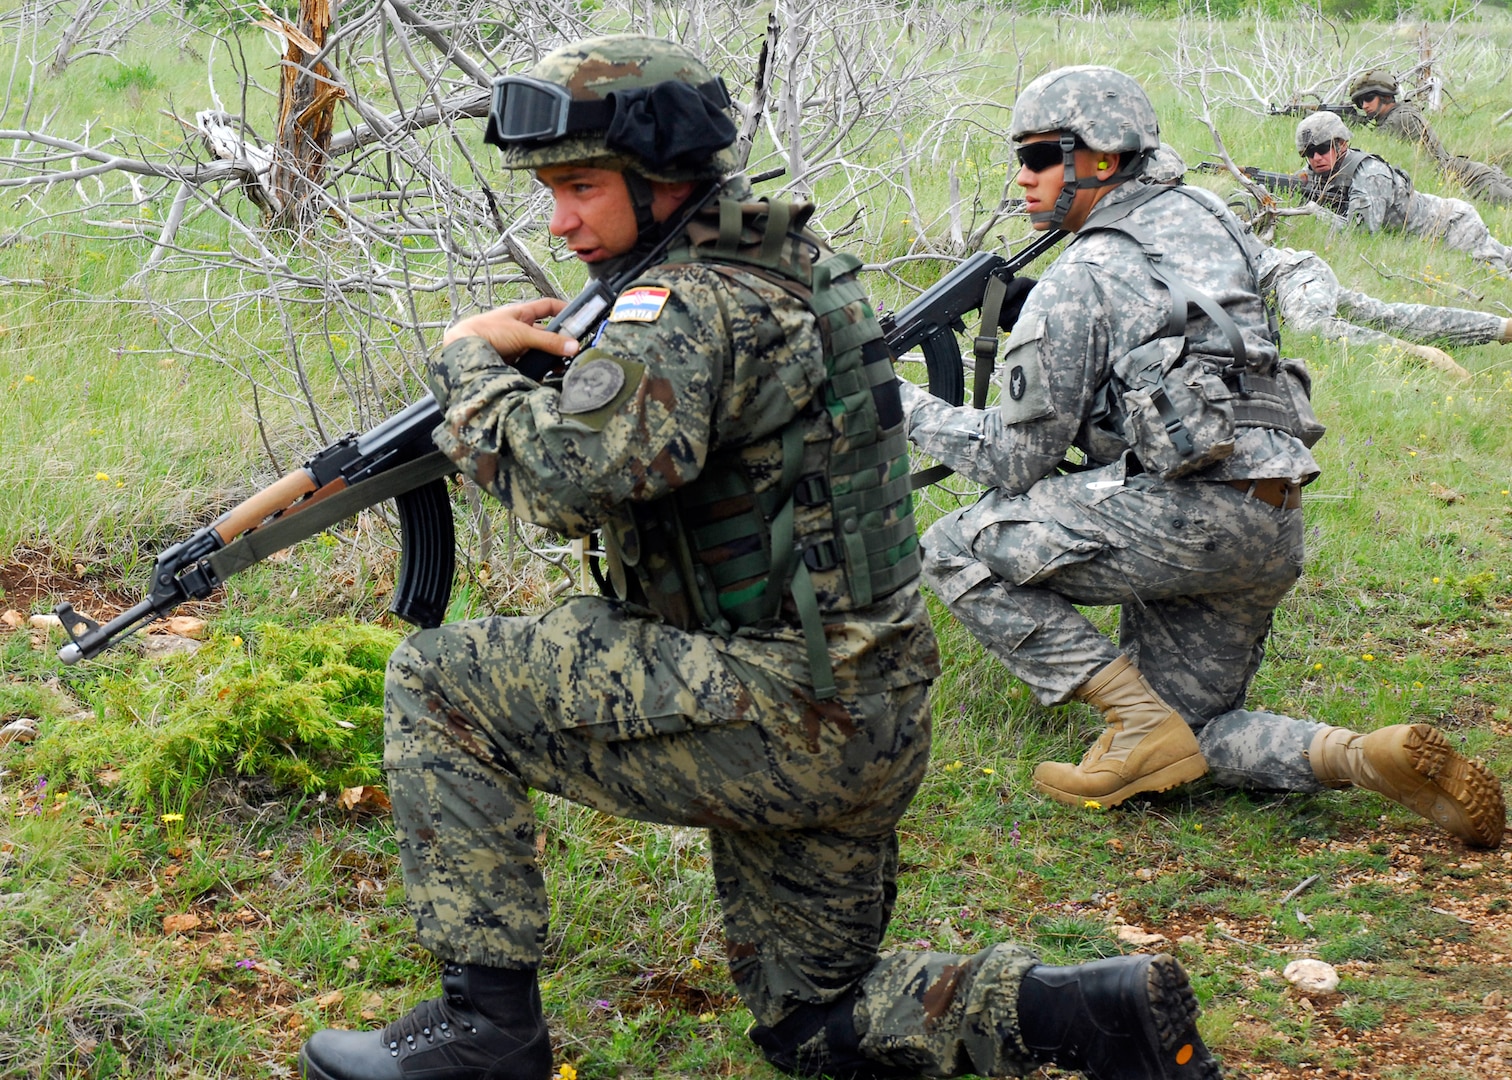 Soldiers from the Minnesota Army National Guard's 2nd Combined Arms Battalion, 136th Infantry Regiment train with members of the Croatian army in Knin, Croatia, May 16, 2012 during Guardex 12.